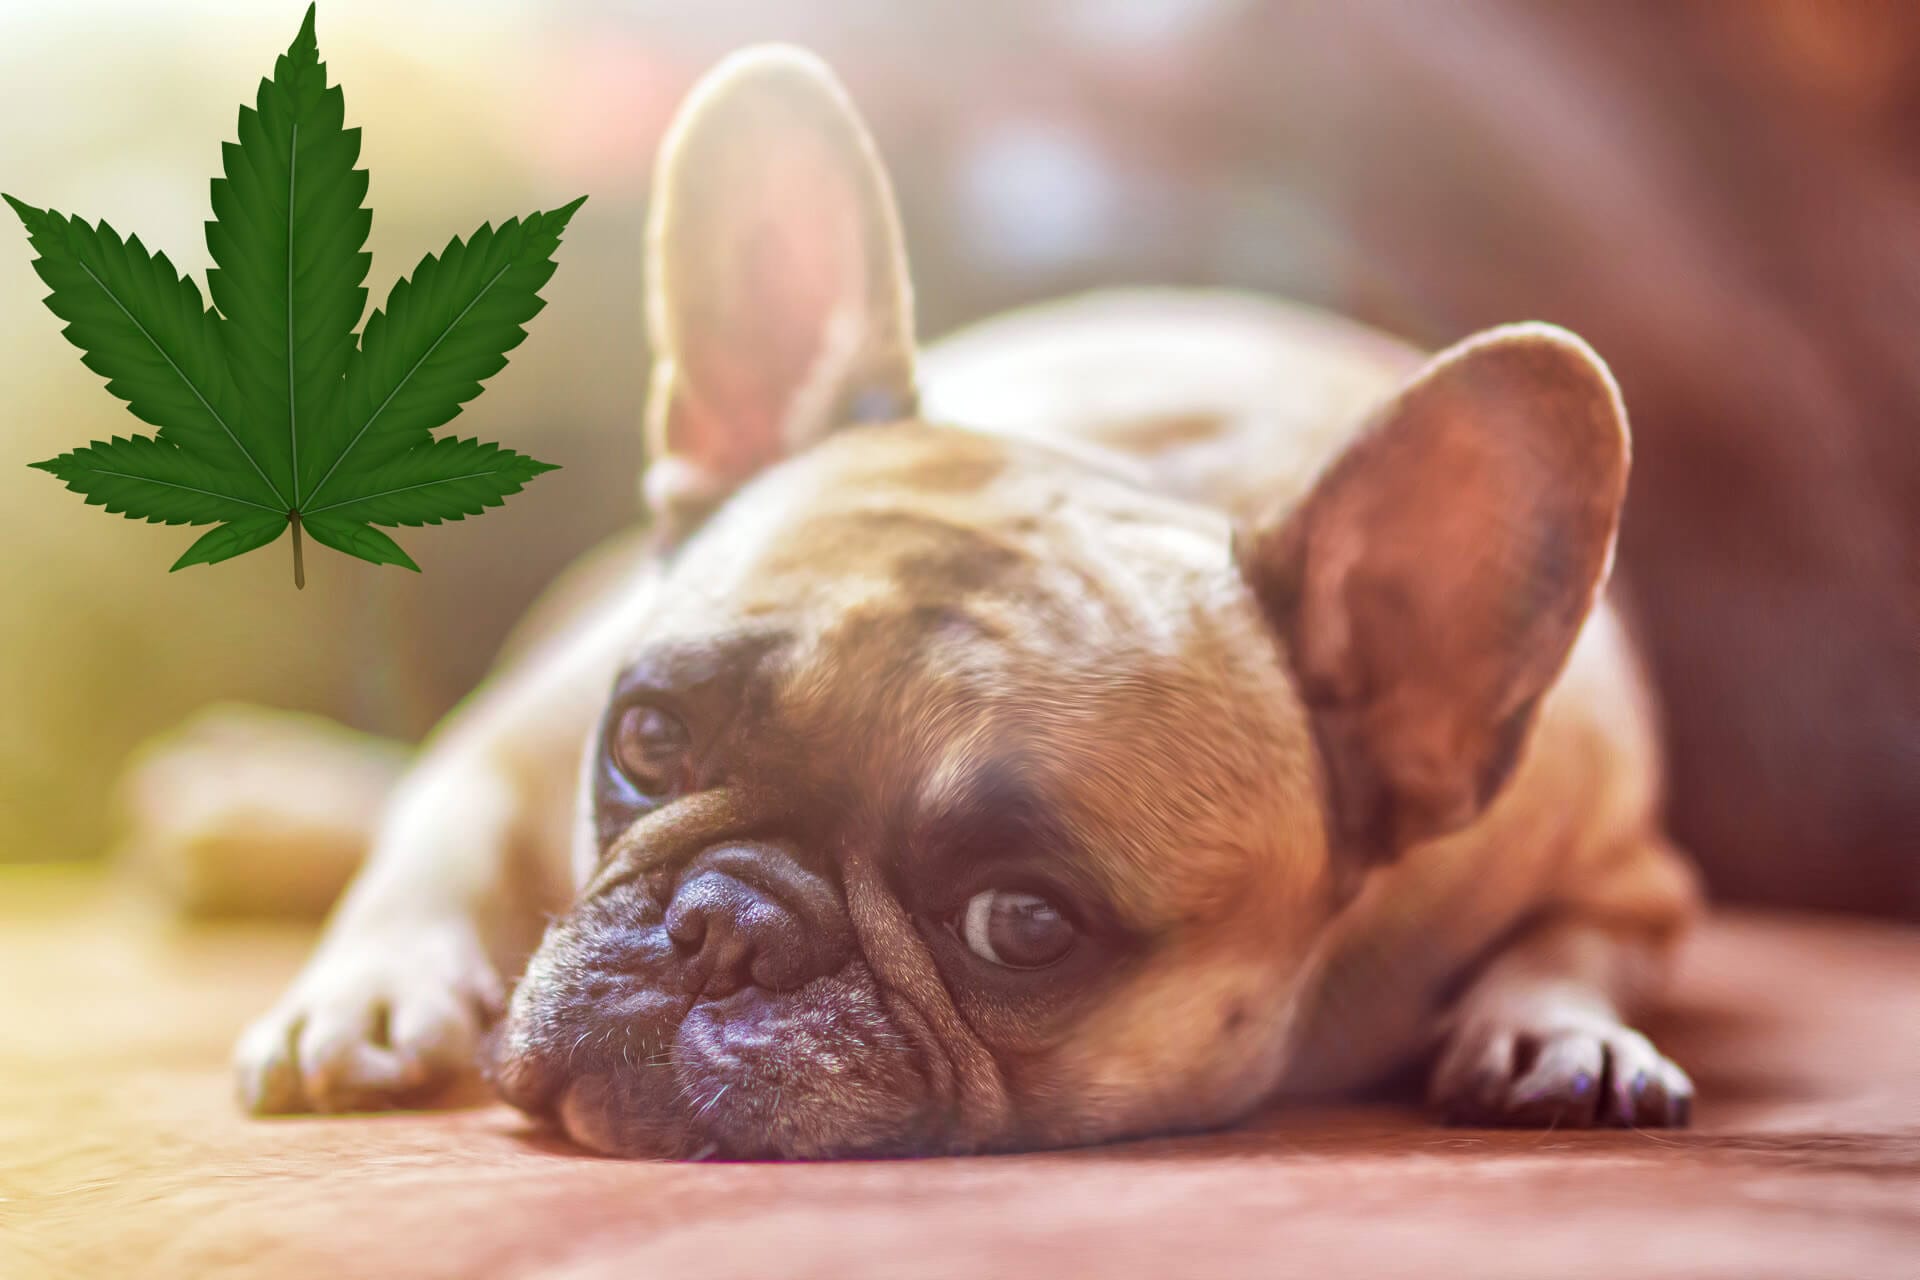 What Would be the Benefits of Giving Hemp Oil to your Dog?